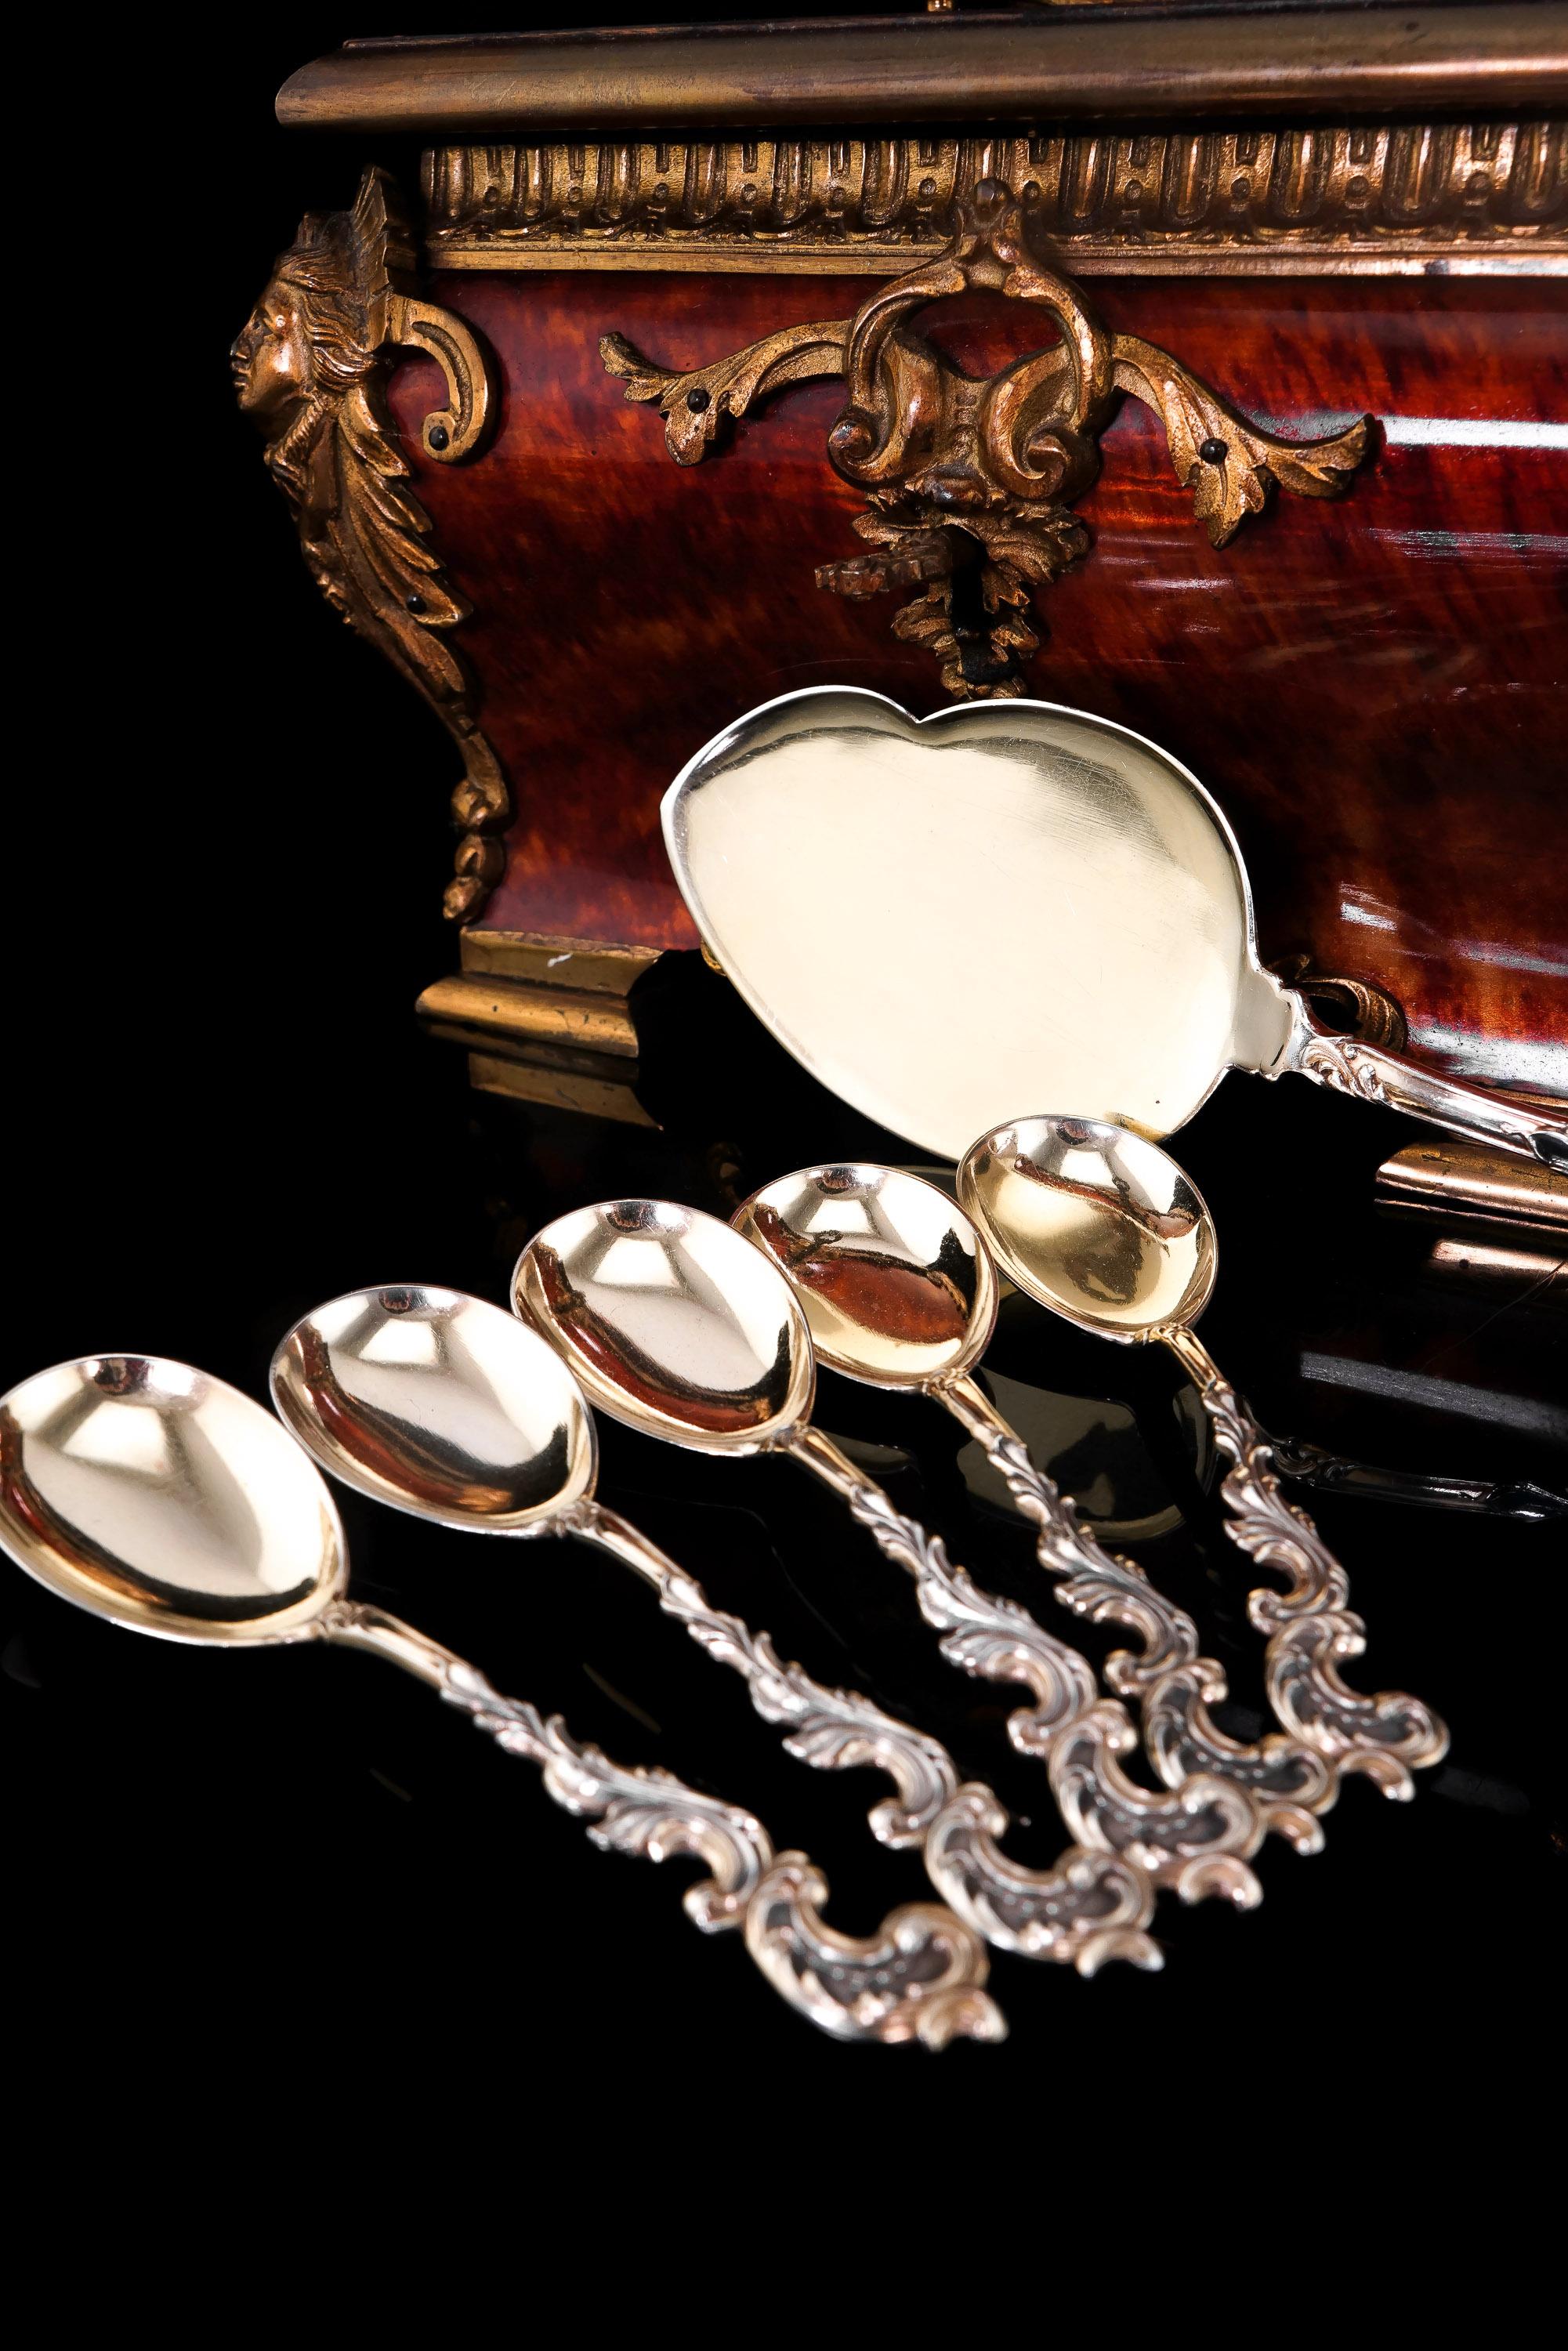 Antique German Solid Silver Icecream Server & Spoons in Rococo Style - c.1900 For Sale 1